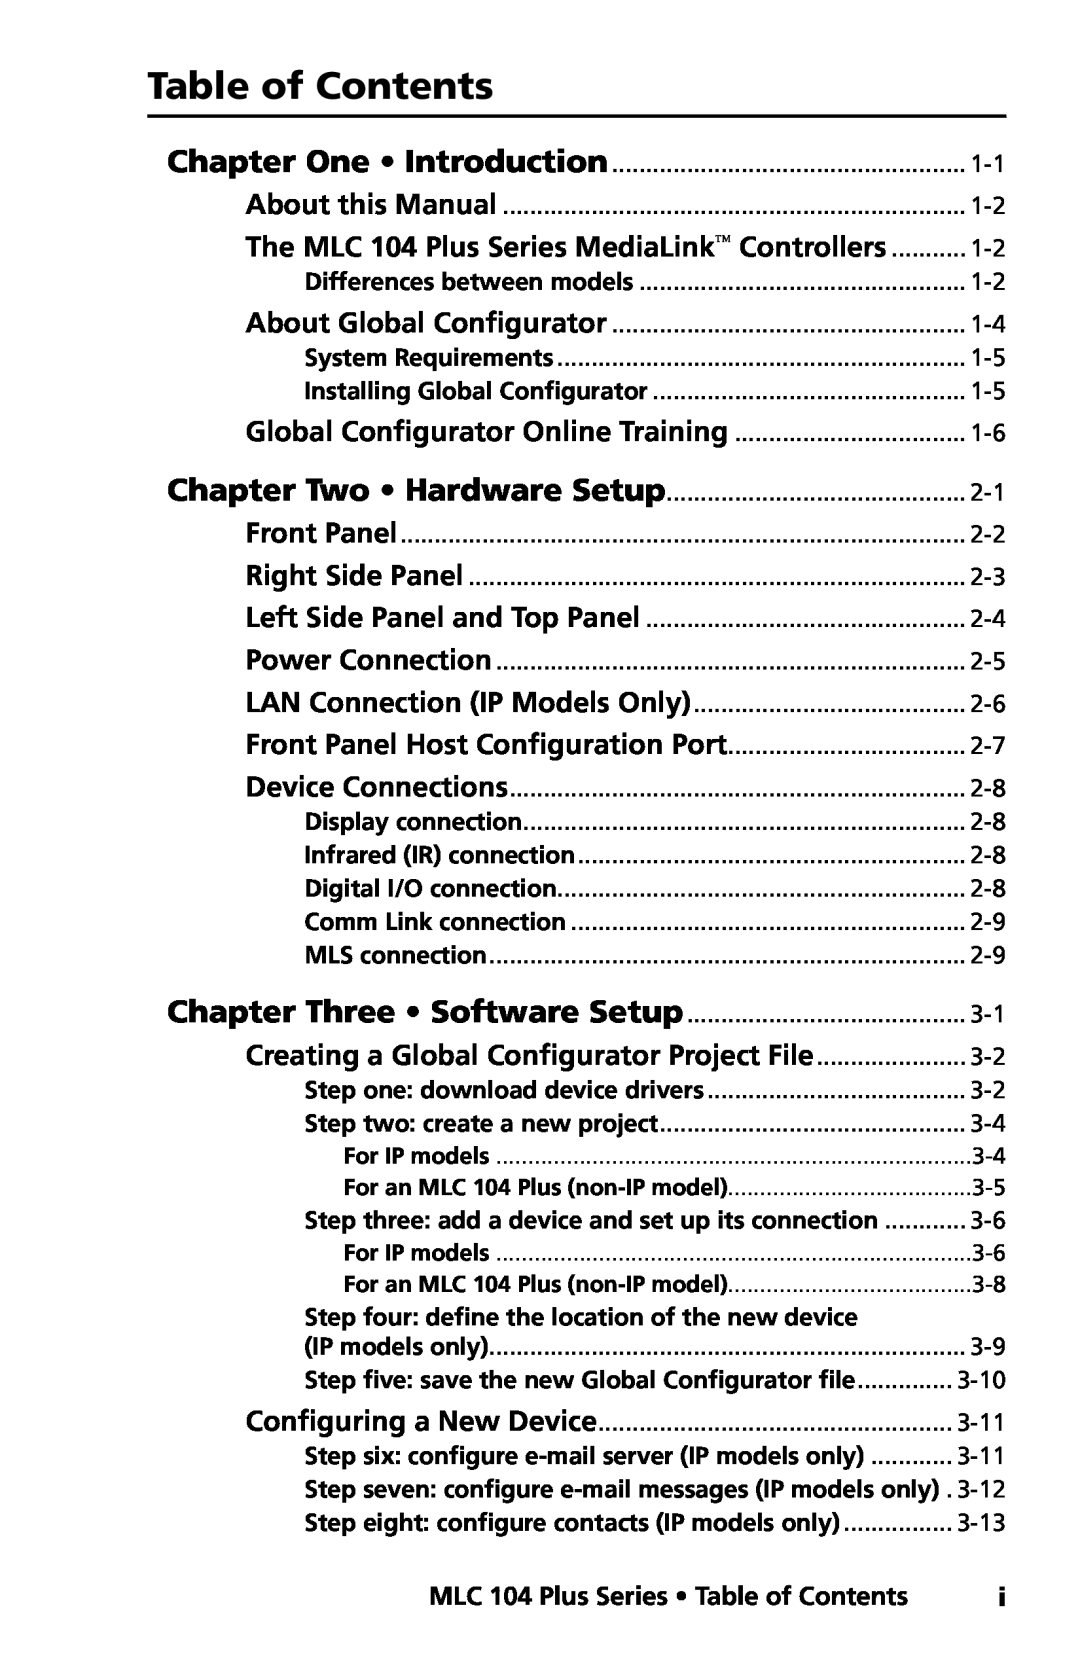 Extron electronic MLC 104 Plus Series Table of Contents, Step three add a device and set up its connection 